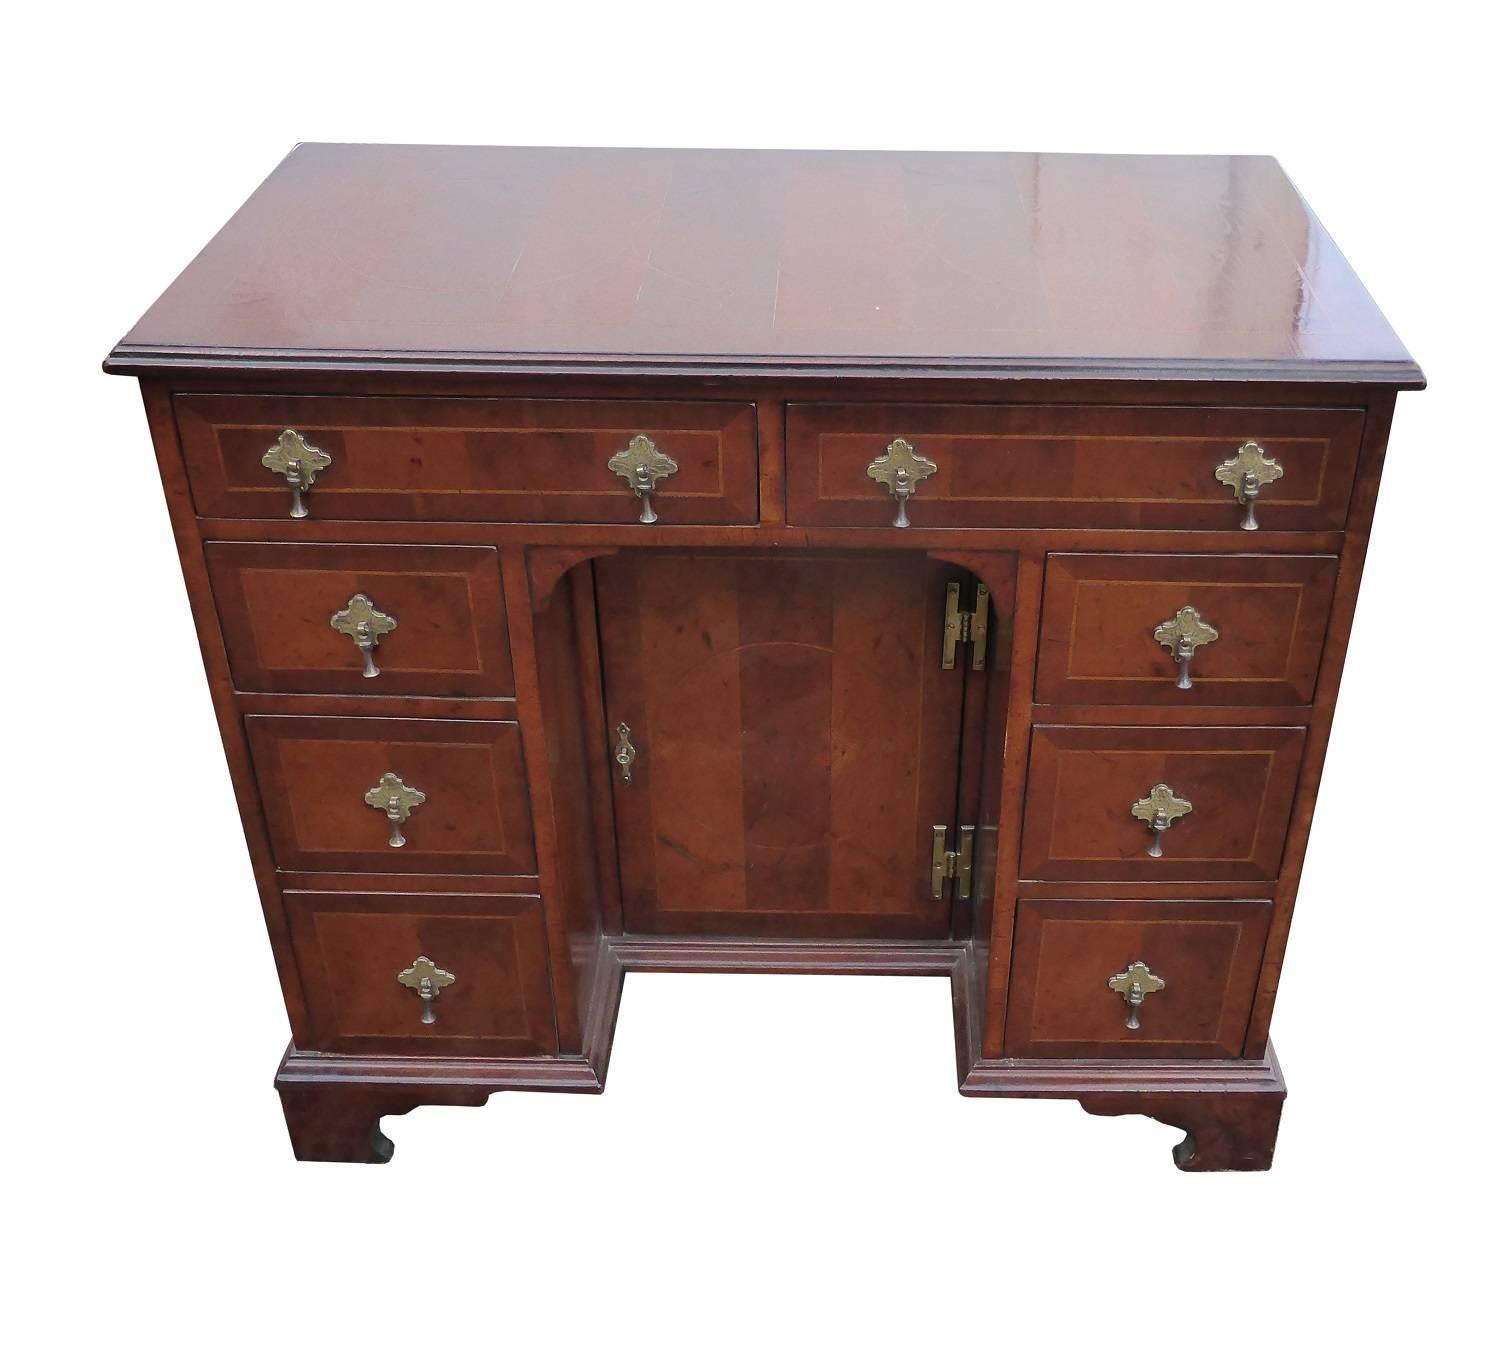 For sale is a good quality Queen Anne style oyster shell and inlaid kneehole desk. The top of the desk has three inlaid circles and is inlaid with oyster shell and crossbanding. Below the top are two drawers, each with stringing inlay and drop